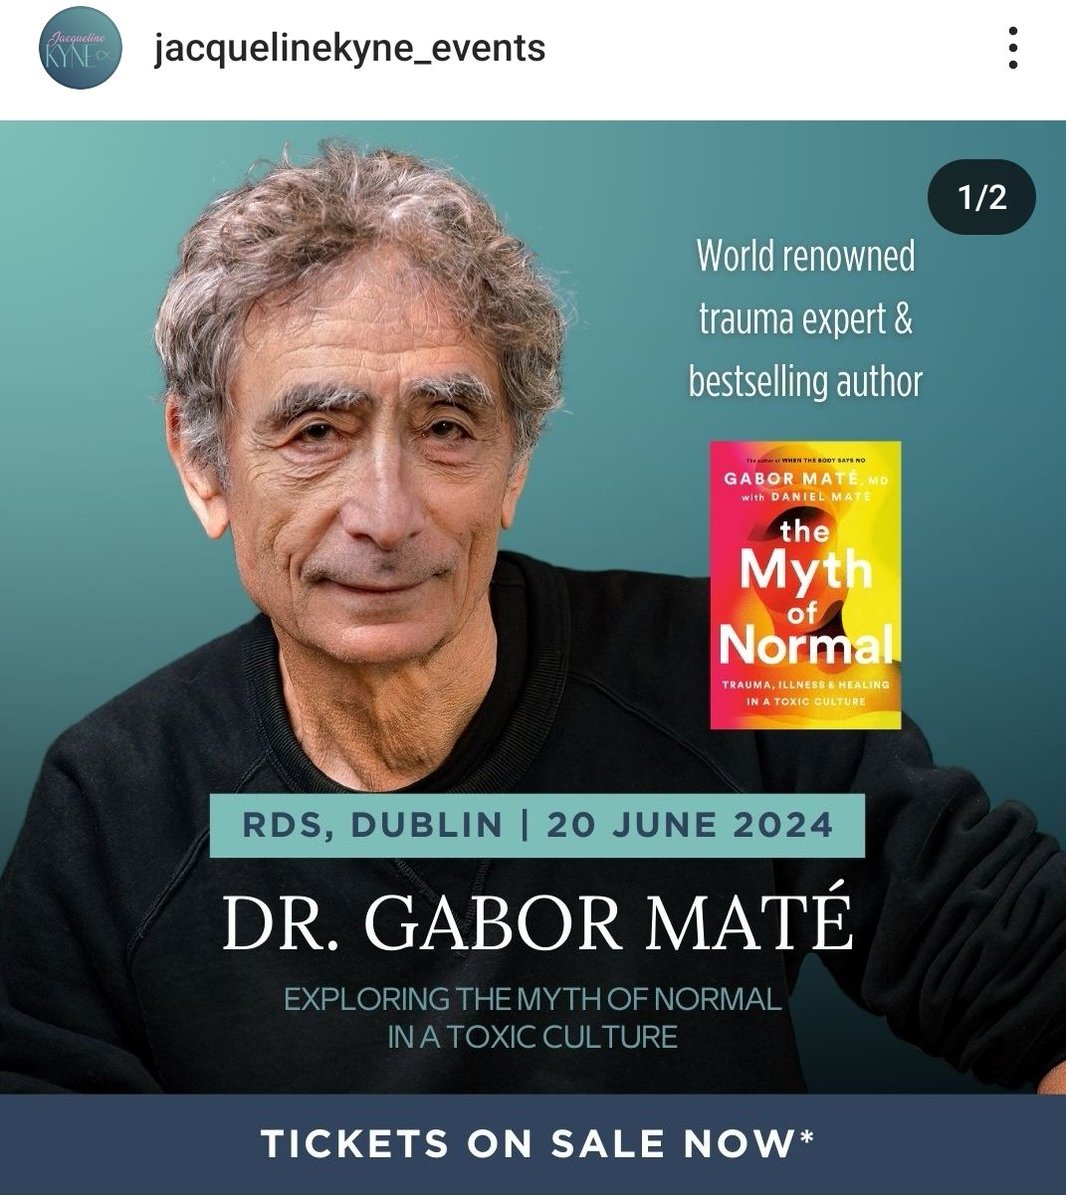 @jkyneevents Beyond excited to attend @DrGaborMate Dublin
Understanding Trauma
Self compassion✨️🙏
#Traumainformed 
#TraumaSensitive
#Childhood generational trauma
War, neglect, poverty, refugess, #MeToo unloved, unwanted, abandoned children
Adulthood avoidance barriers of love